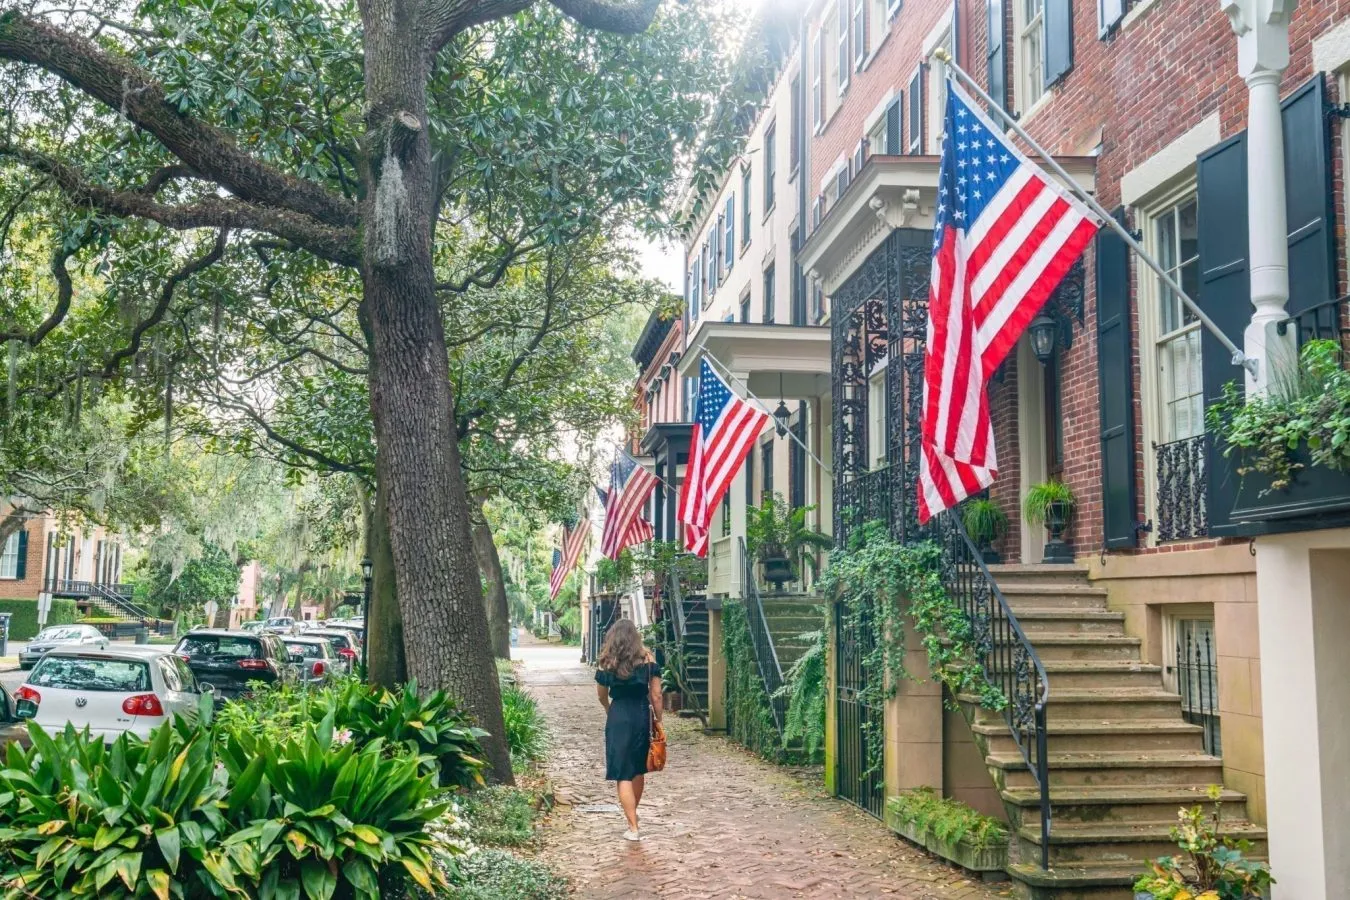 Kate Storm in a black dress walking away from the camera along Jones Steet in Savannah GA, with several American flags hanging from homes on the right side of the photo